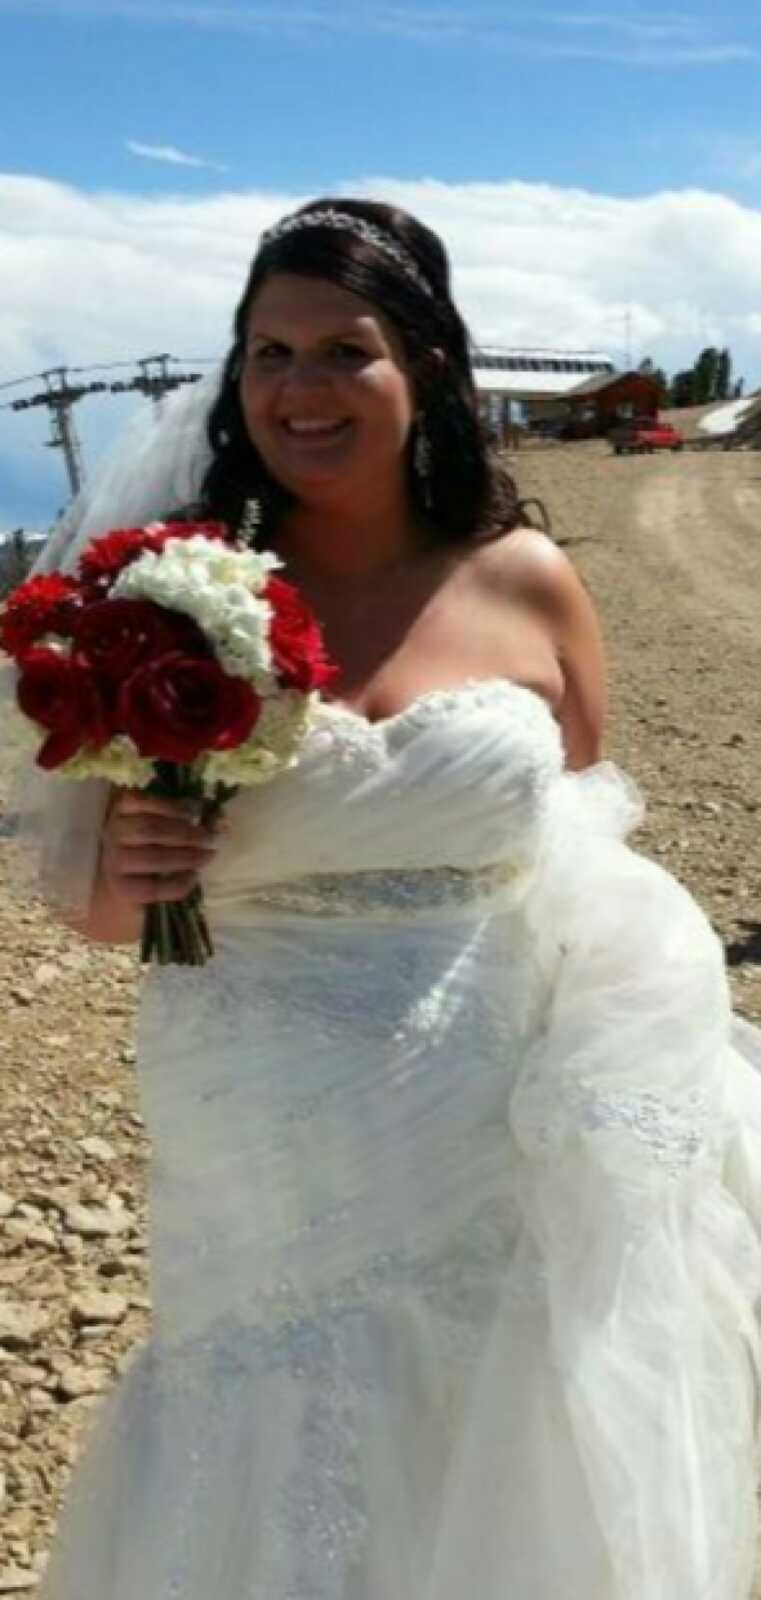 woman on her wedding day smiling and happy